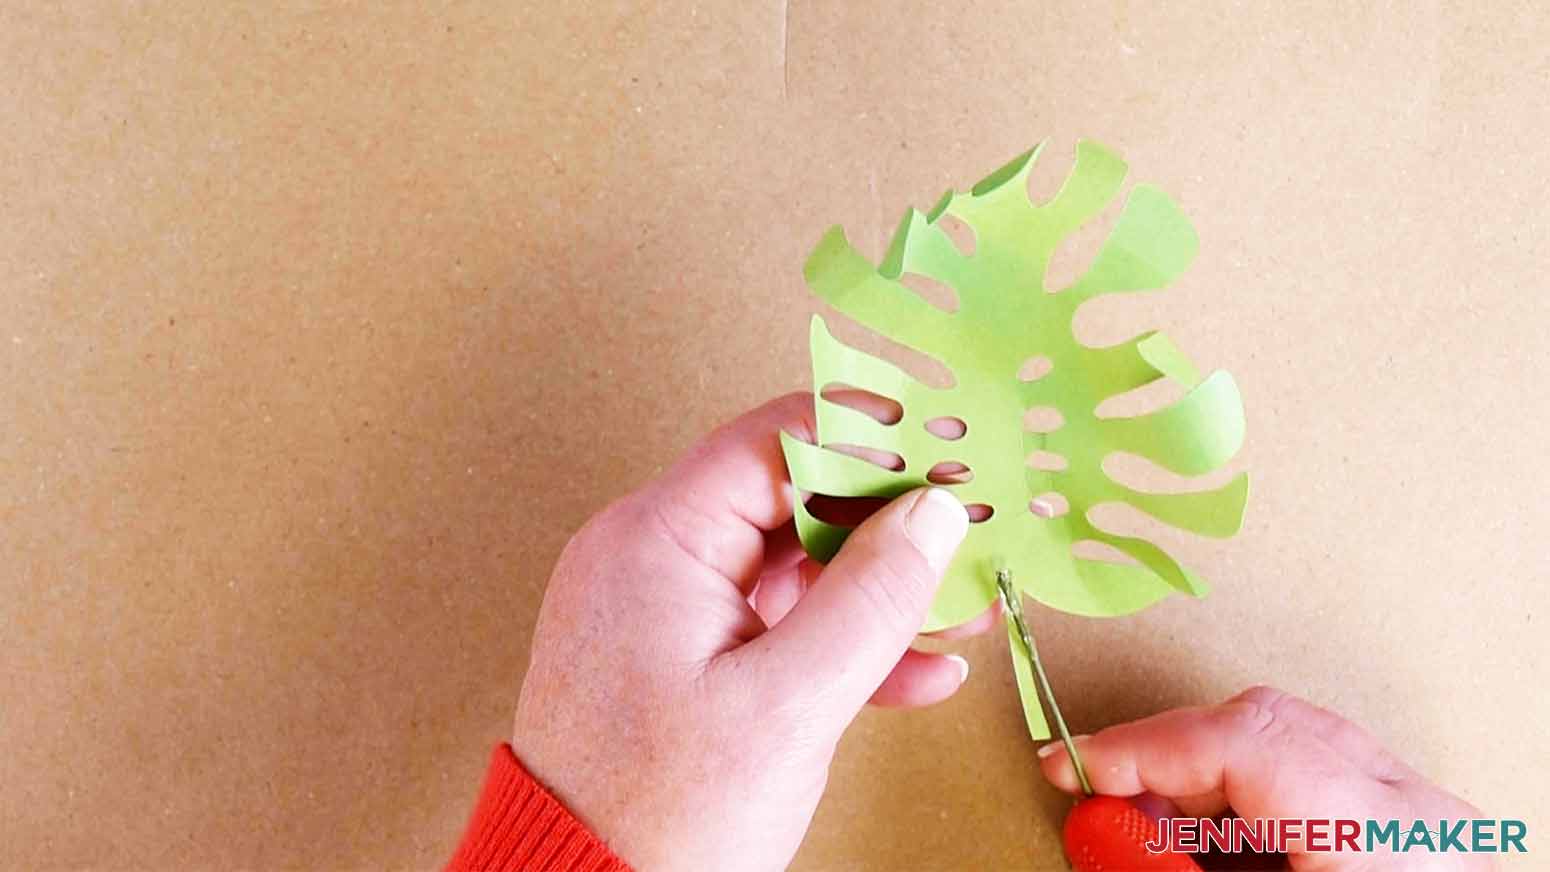 Glue the floral wire to the monstera leaf when making my paper succulents project